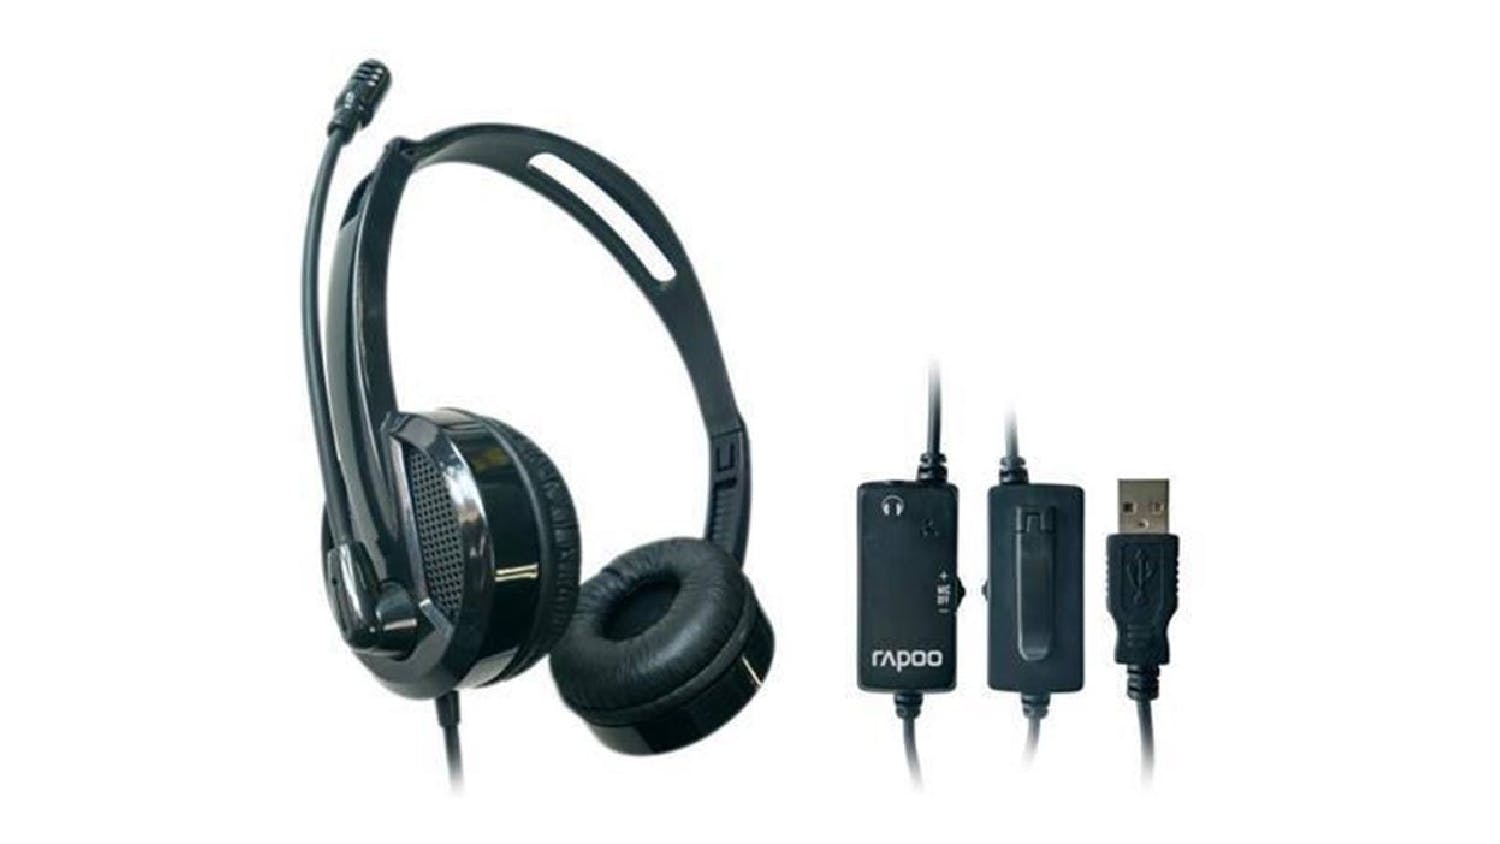 Rapoo H100 USB Wired Stereo Headset - Black